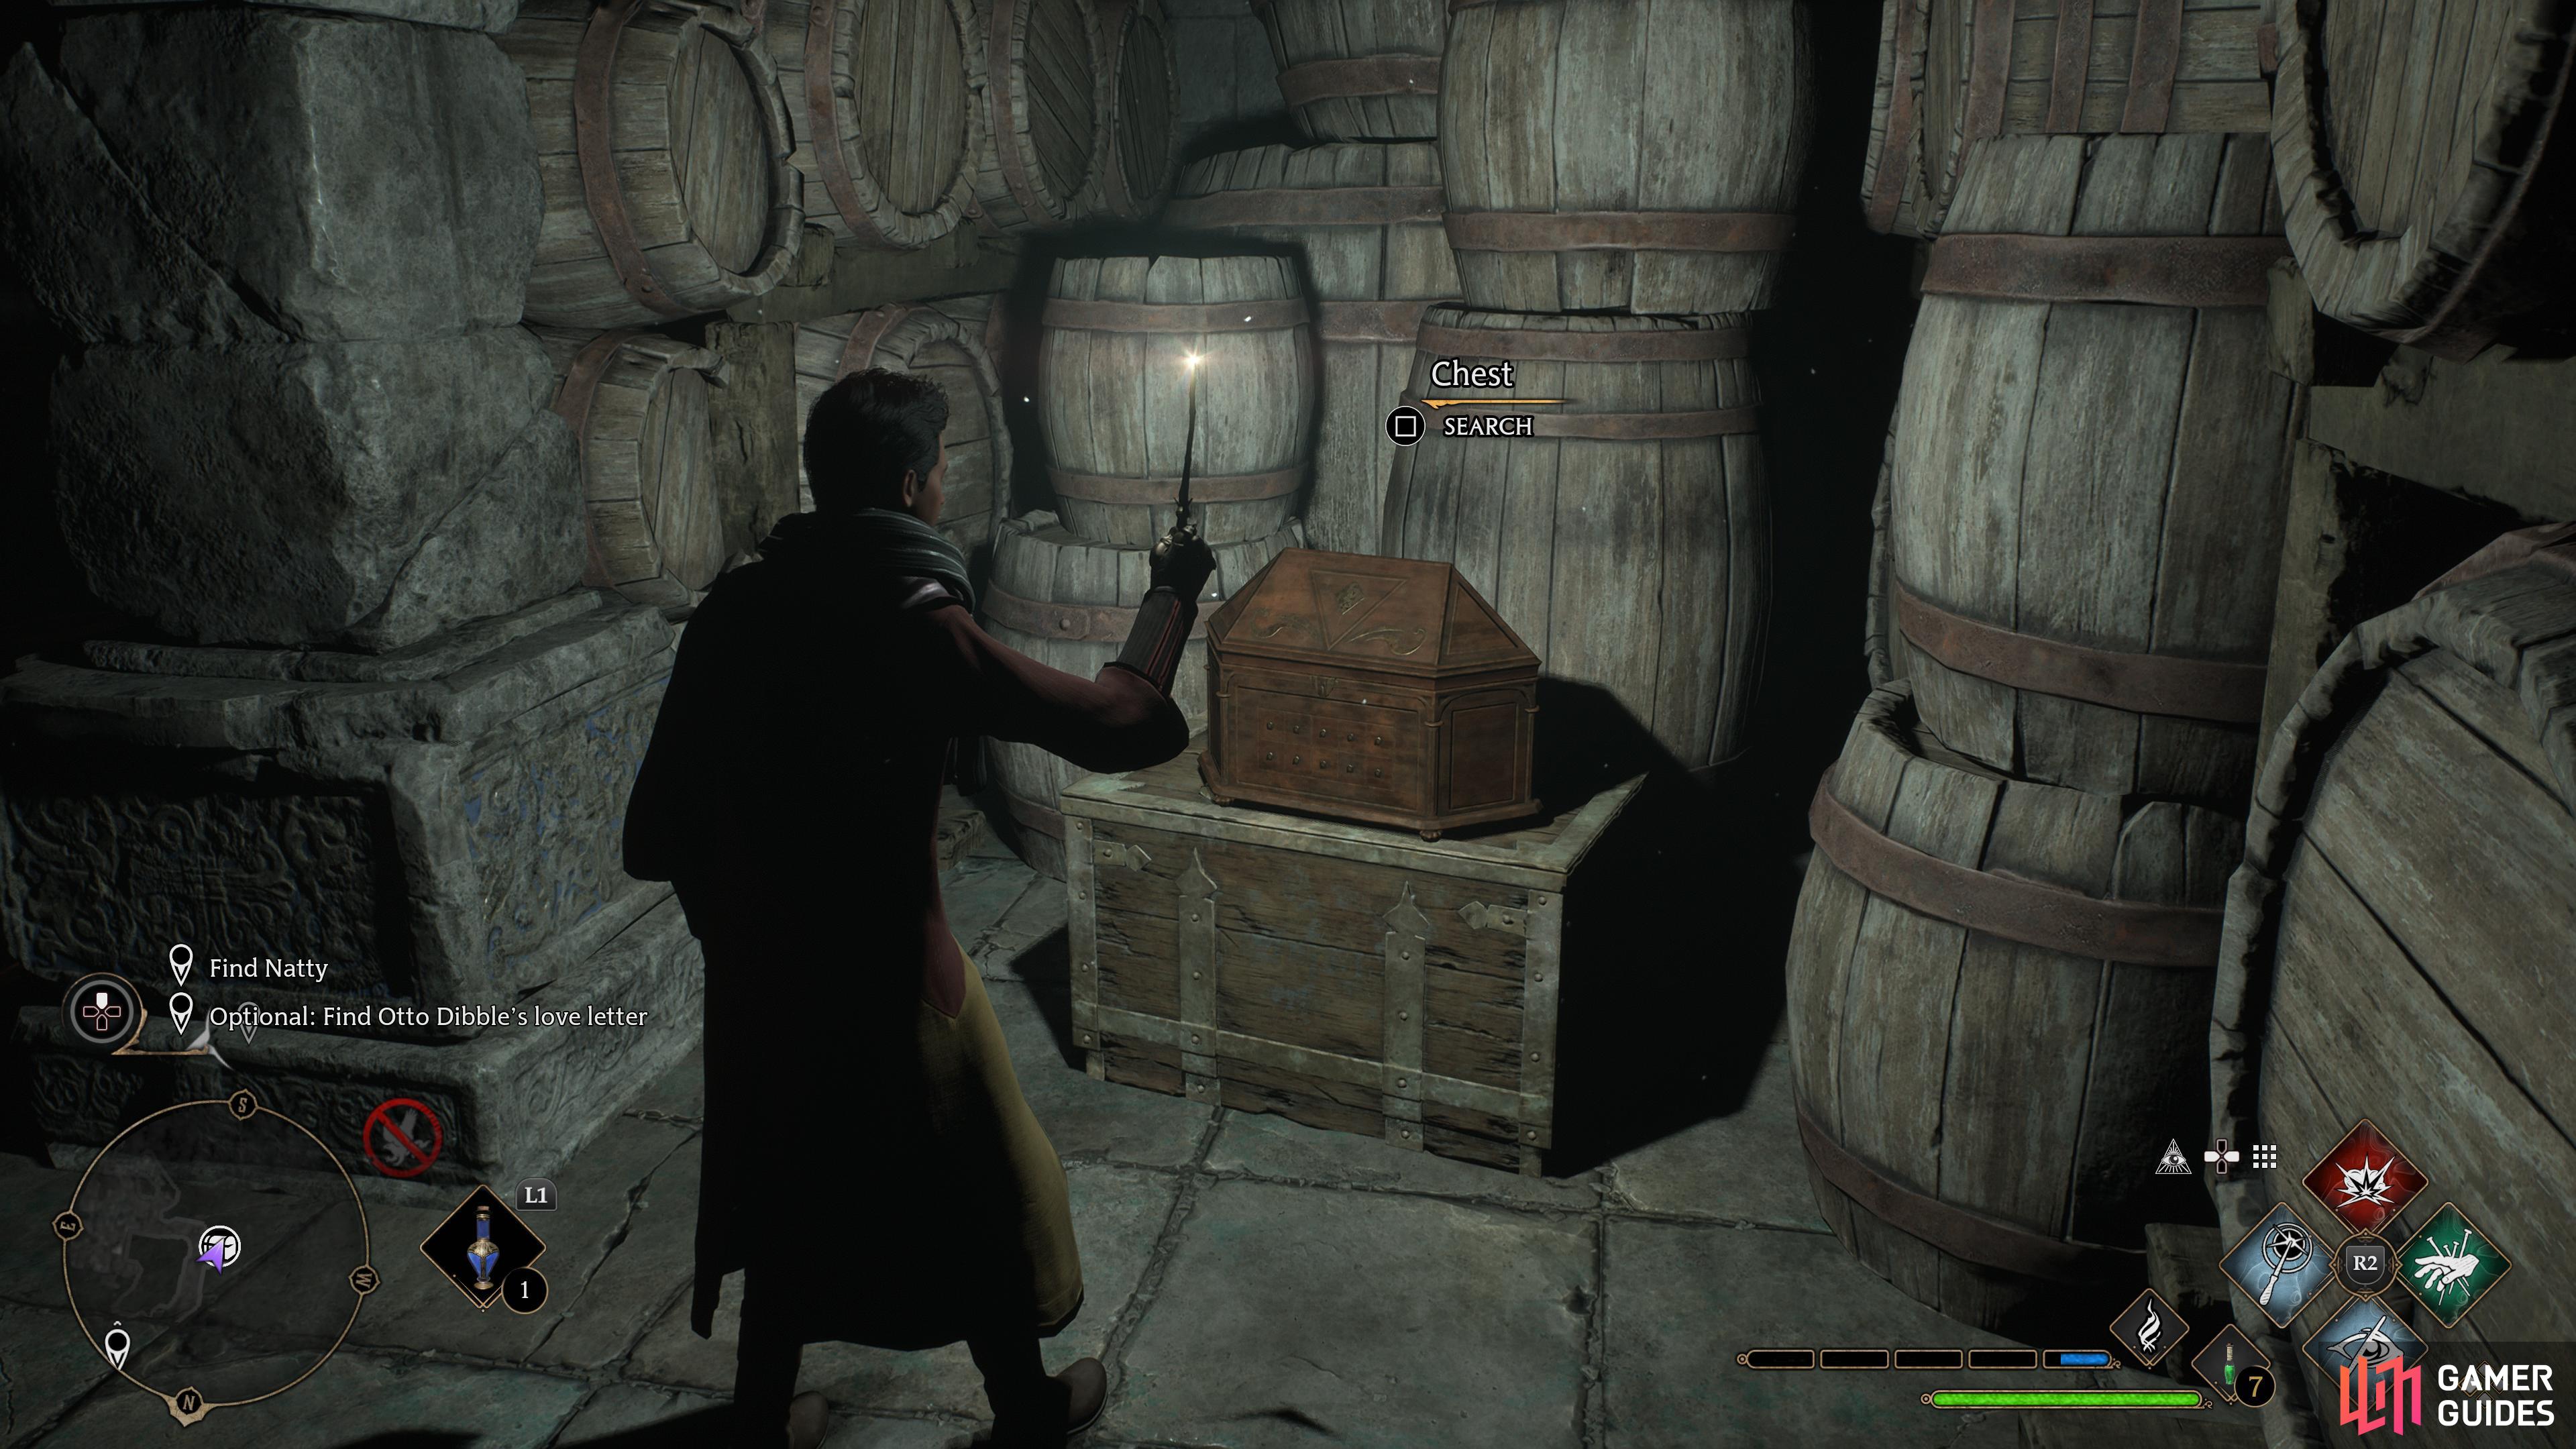 the chest can be found in the large room.